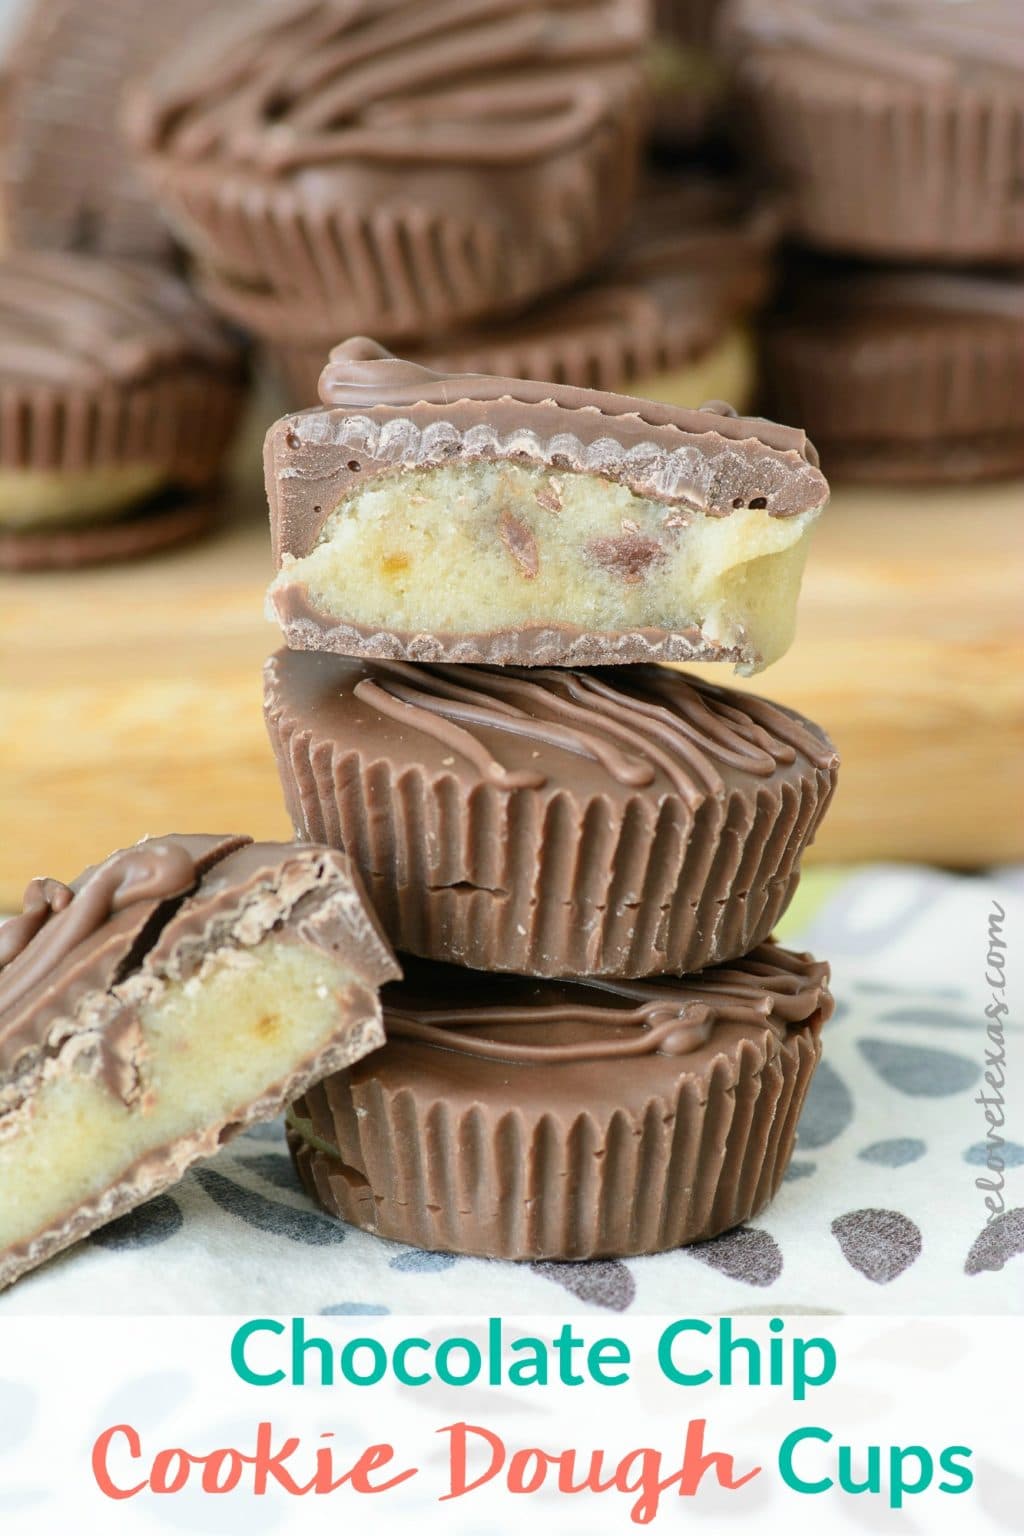 This Chocolate Chip Cookie Dough Cups recipe combines your favorite guilty pleasure...chocolate chip cookie dough hidden inside one of your favorite candies. But these no bake, edible chocolate chip cookie dough is completely safe to eat and will undoubtedly melt in your mouth.